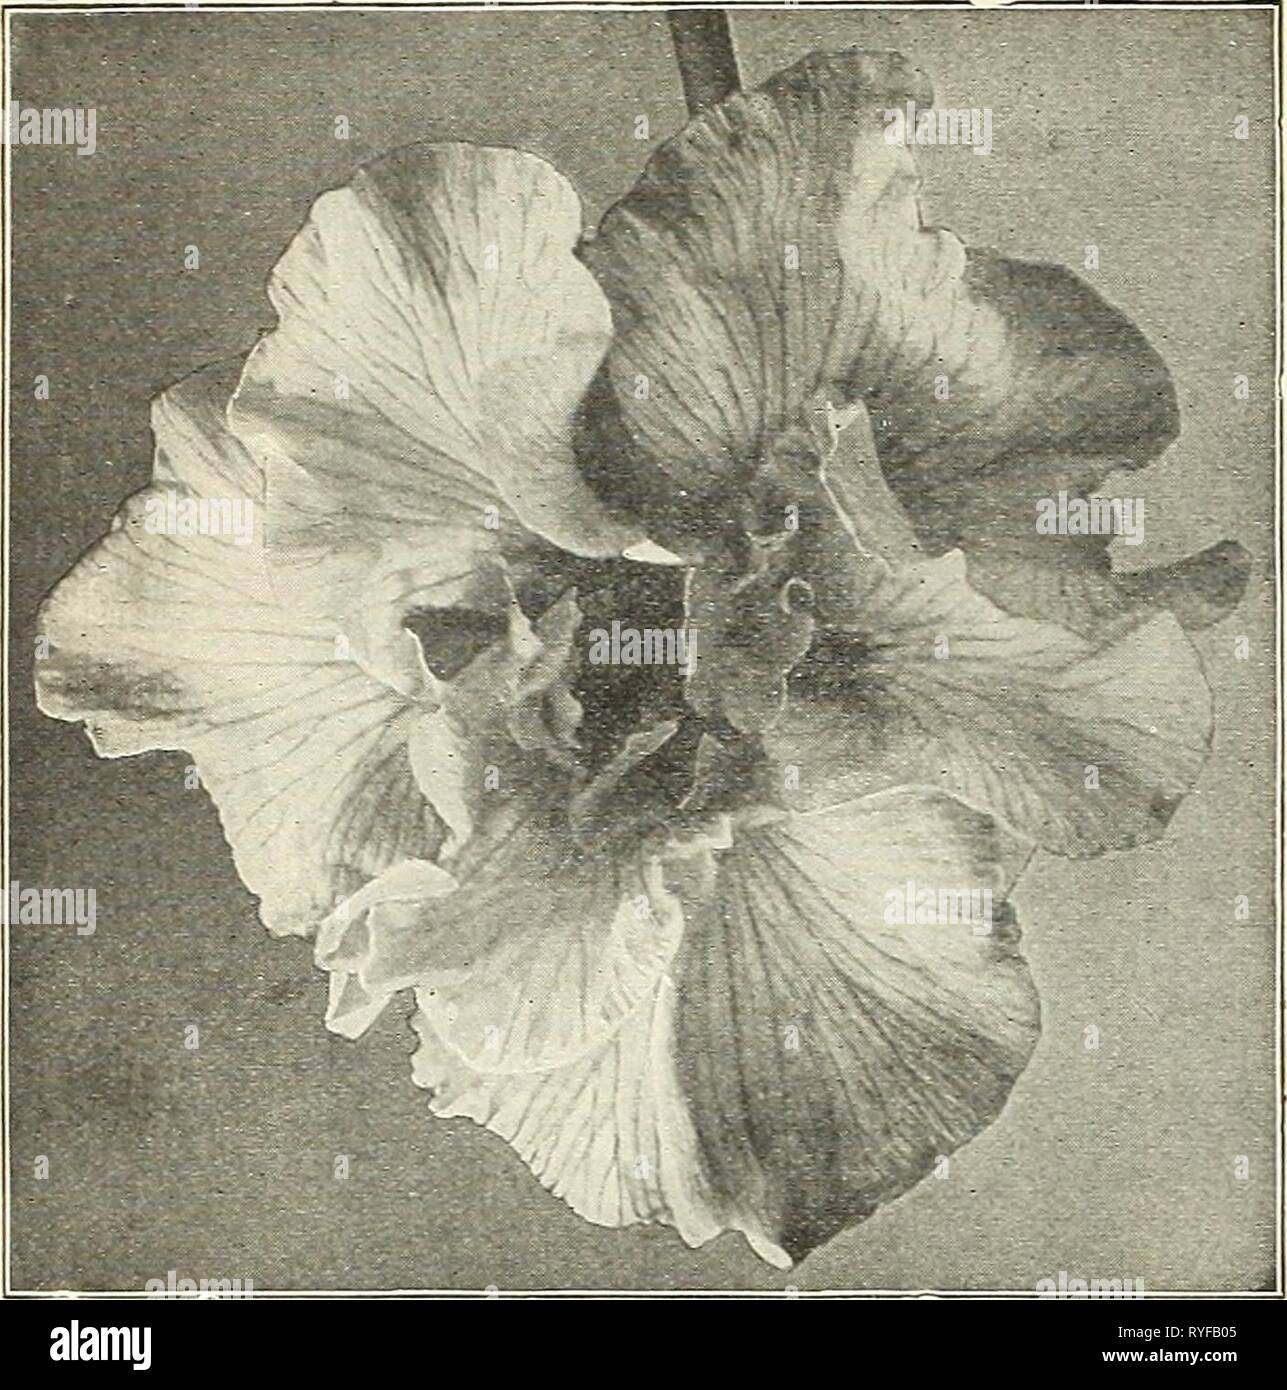 Dreer's wholesale price list : flower seeds for florists plants for florists bulbs for florists vegetable seeds sundries for florists  dreerswholesalep1927henr Year: 1927  64 HENRY A. DREER, PHILADELPHIA, PA., WHOLESALE PRICE LIST    Japanese Iris Dreer's Imperial Japanese Iris ]Vo. Order by name or nninber 3. Kosni-no-iro. Violet-blue veined with white; 6 petals. 4. Ifomo-no-niui. A fine free flowering creamy white; 6 petals. 5. Koki-no-iro. Light violet-purple with white : veins; 6 petals., 26. TTcliiu. Rich crimson-purple, veined white; 6 petals. 31. Rinho. Eich lively purple with white vei Stock Photo